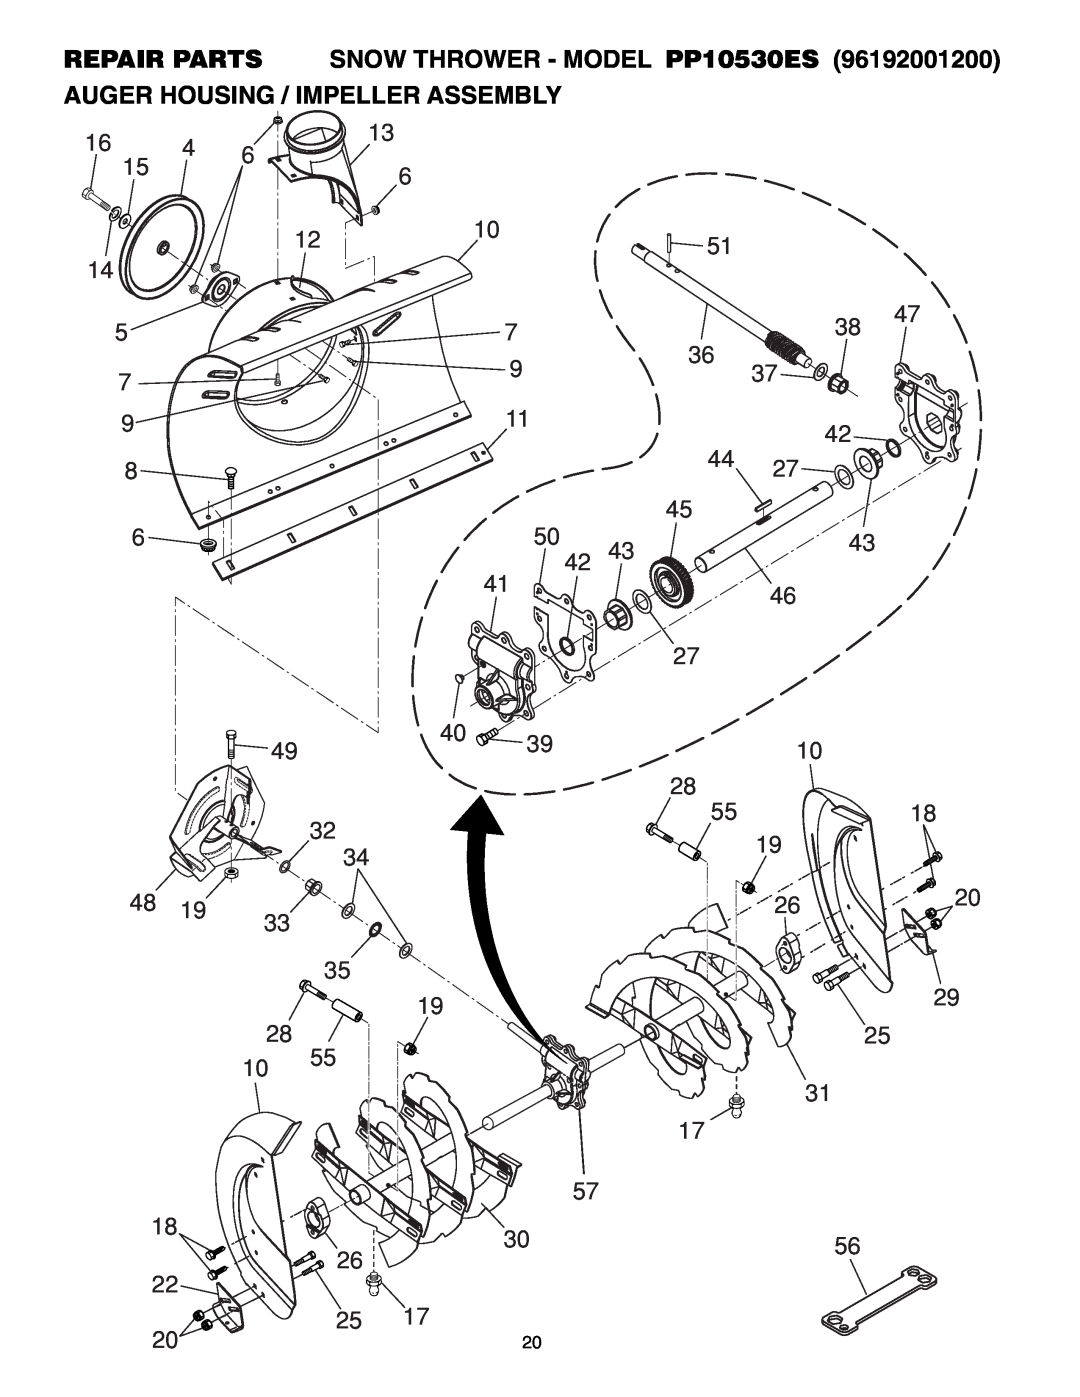 Poulan owner manual 5518, Auger Housing / Impeller Assembly, REPAIR PARTS SNOW THROWER - MODEL PP10530ES 